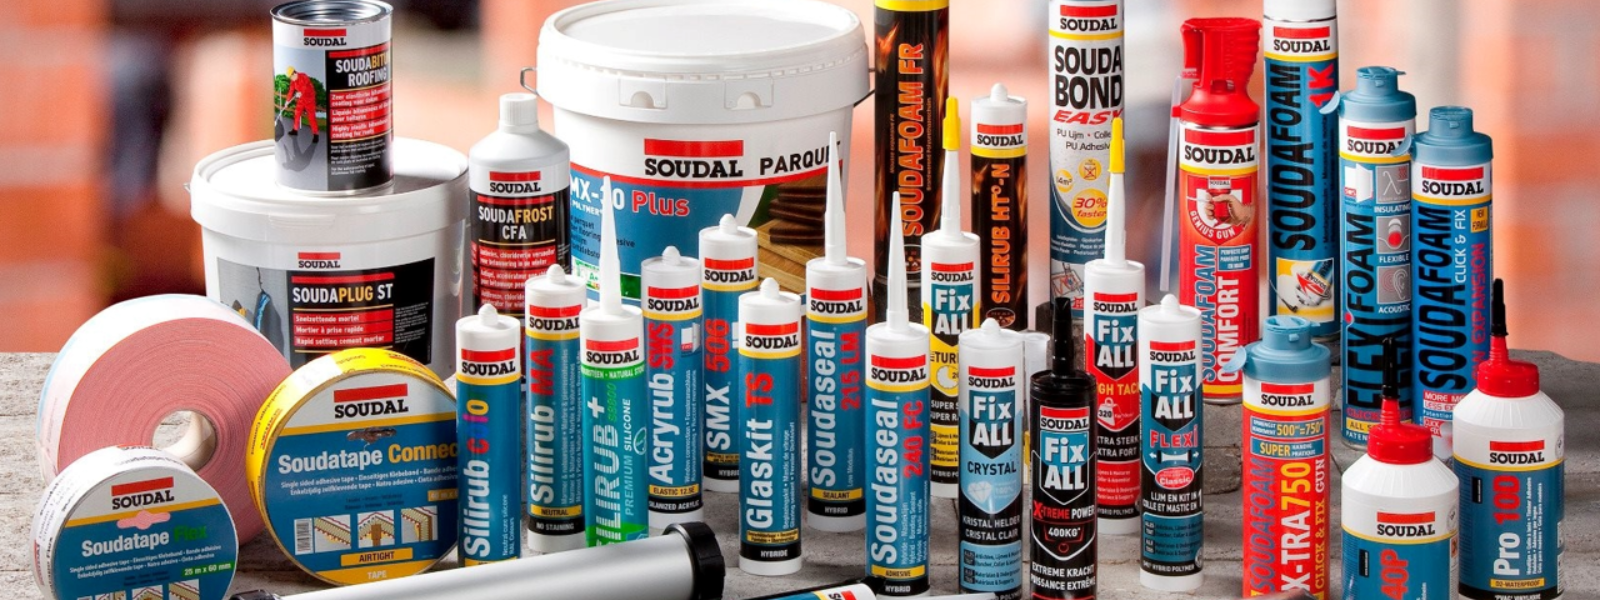 SOUDAL AS - hybrid polymers, silicones, ms polymers / fix-all, adhesives and masts, pur foam maxtwo, sws, tapes, cleanroom...